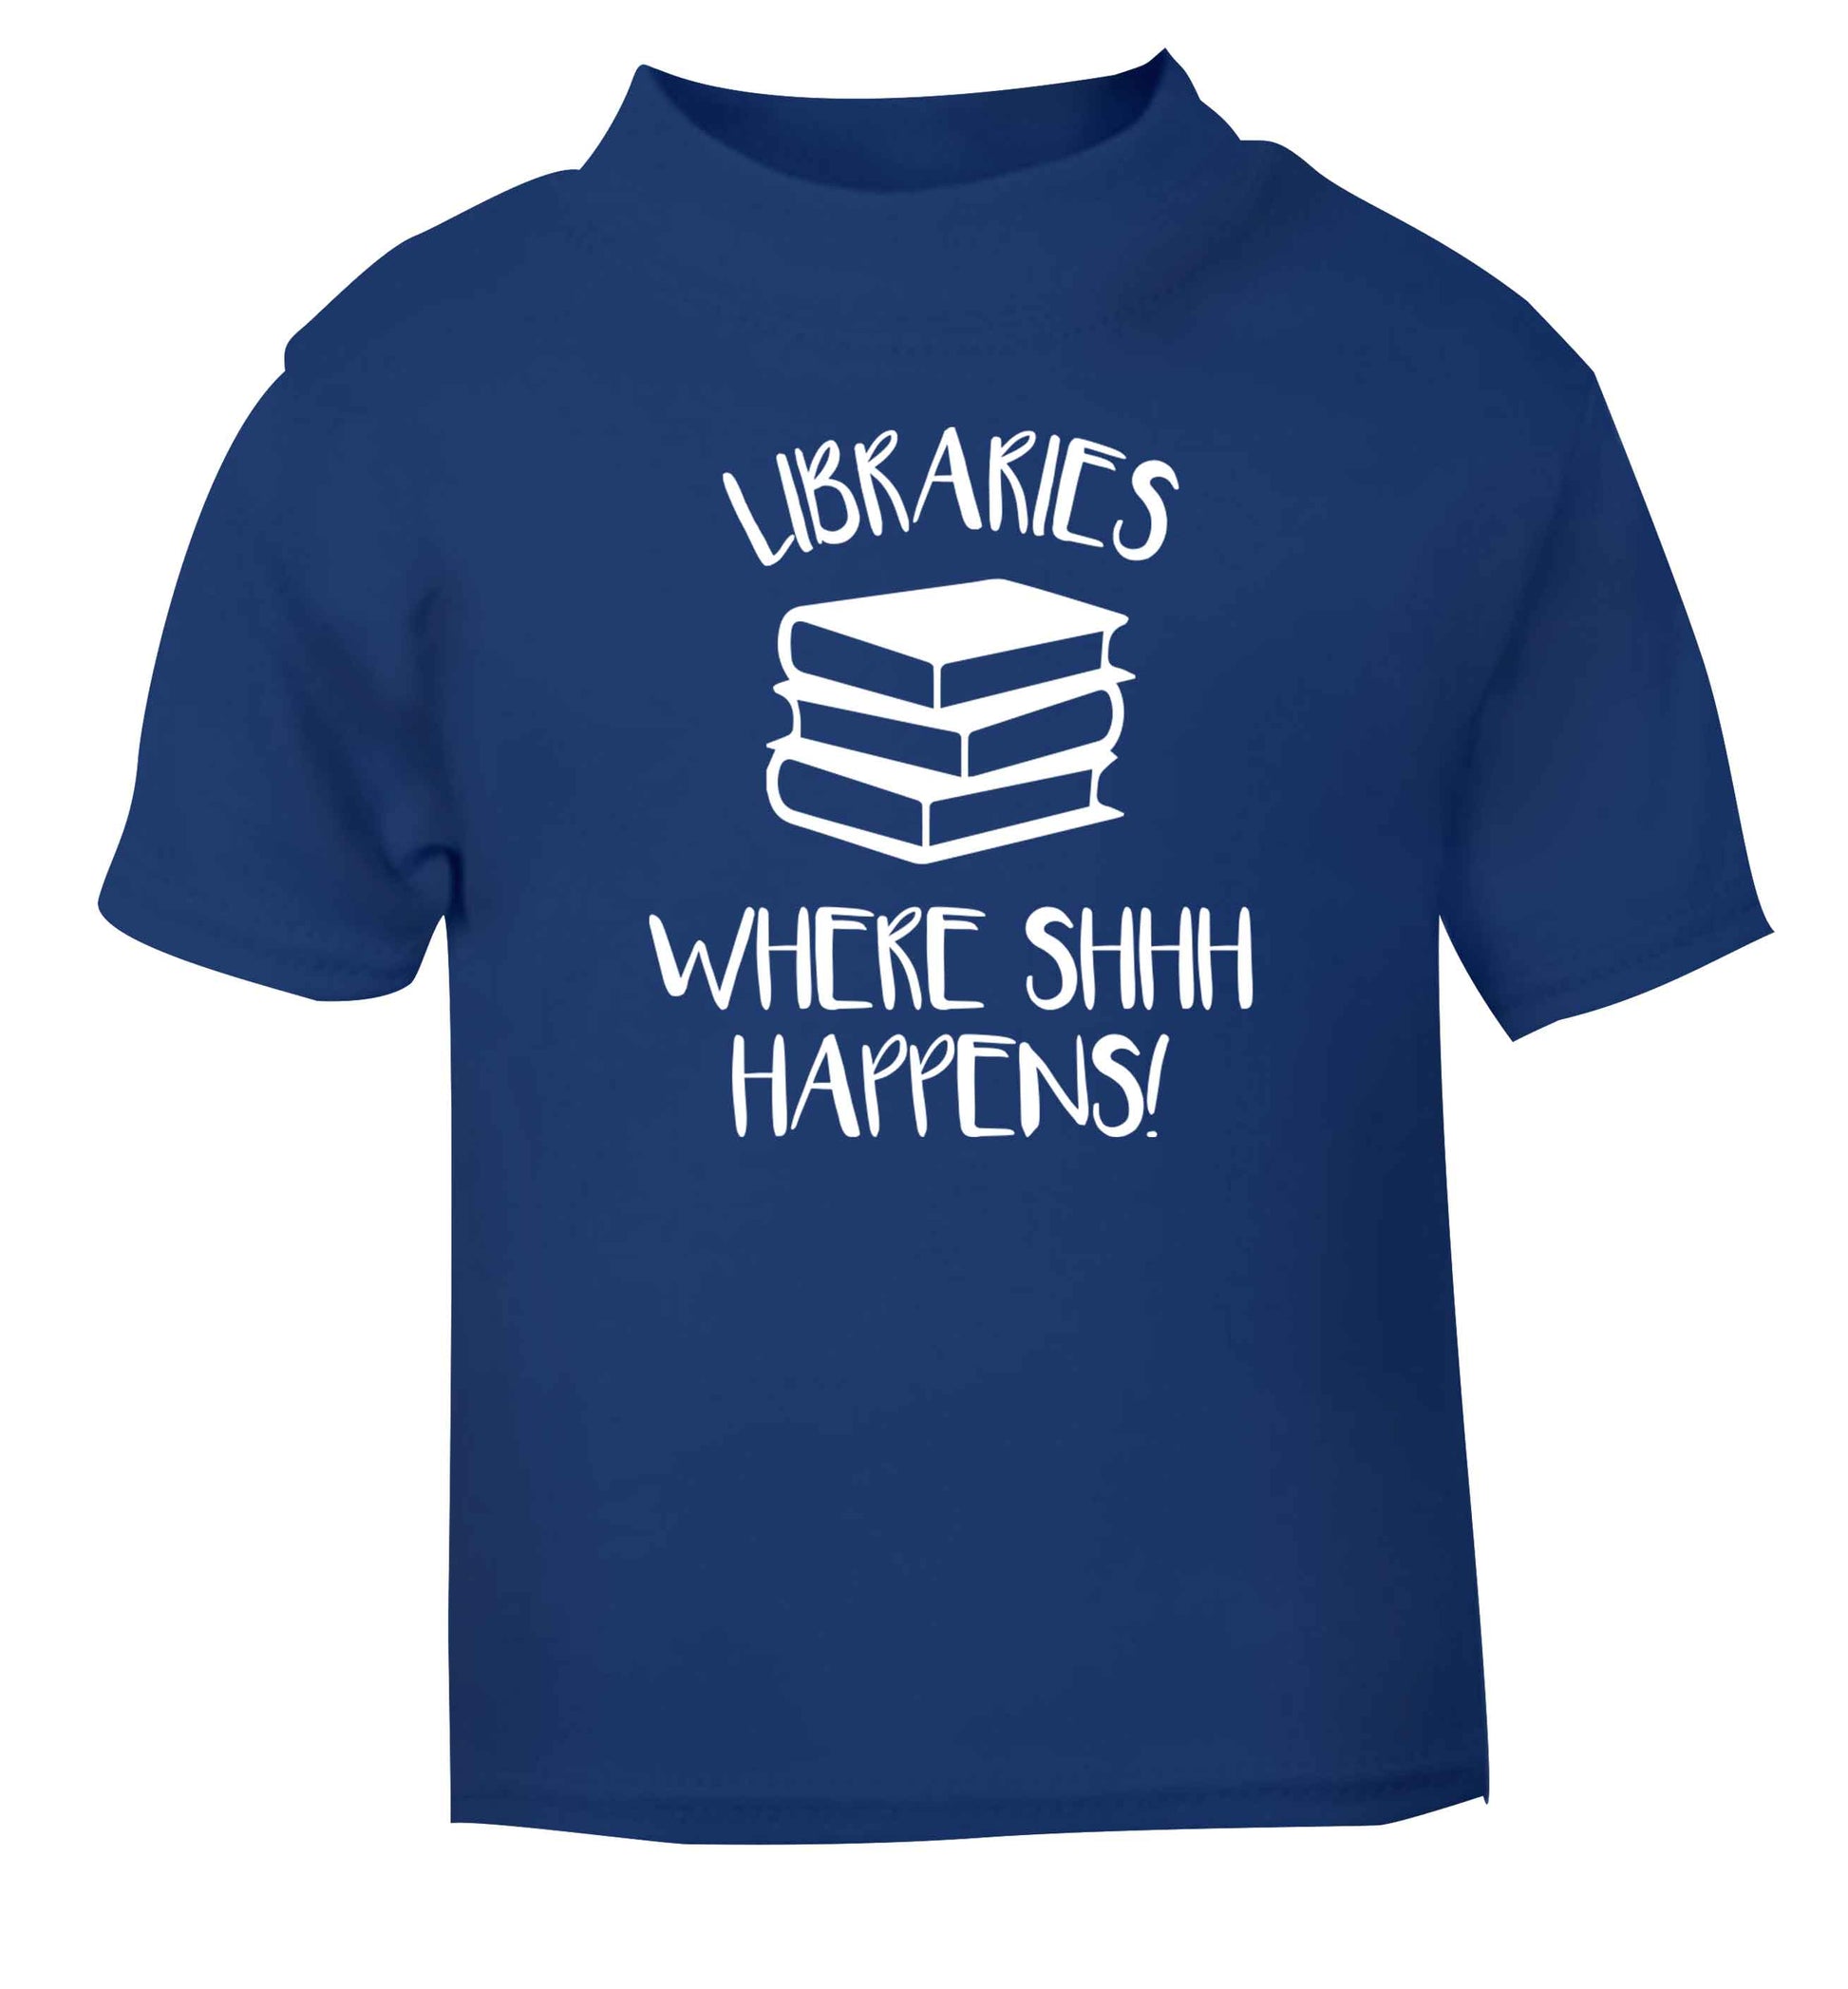 Libraries where shh happens! blue Baby Toddler Tshirt 2 Years